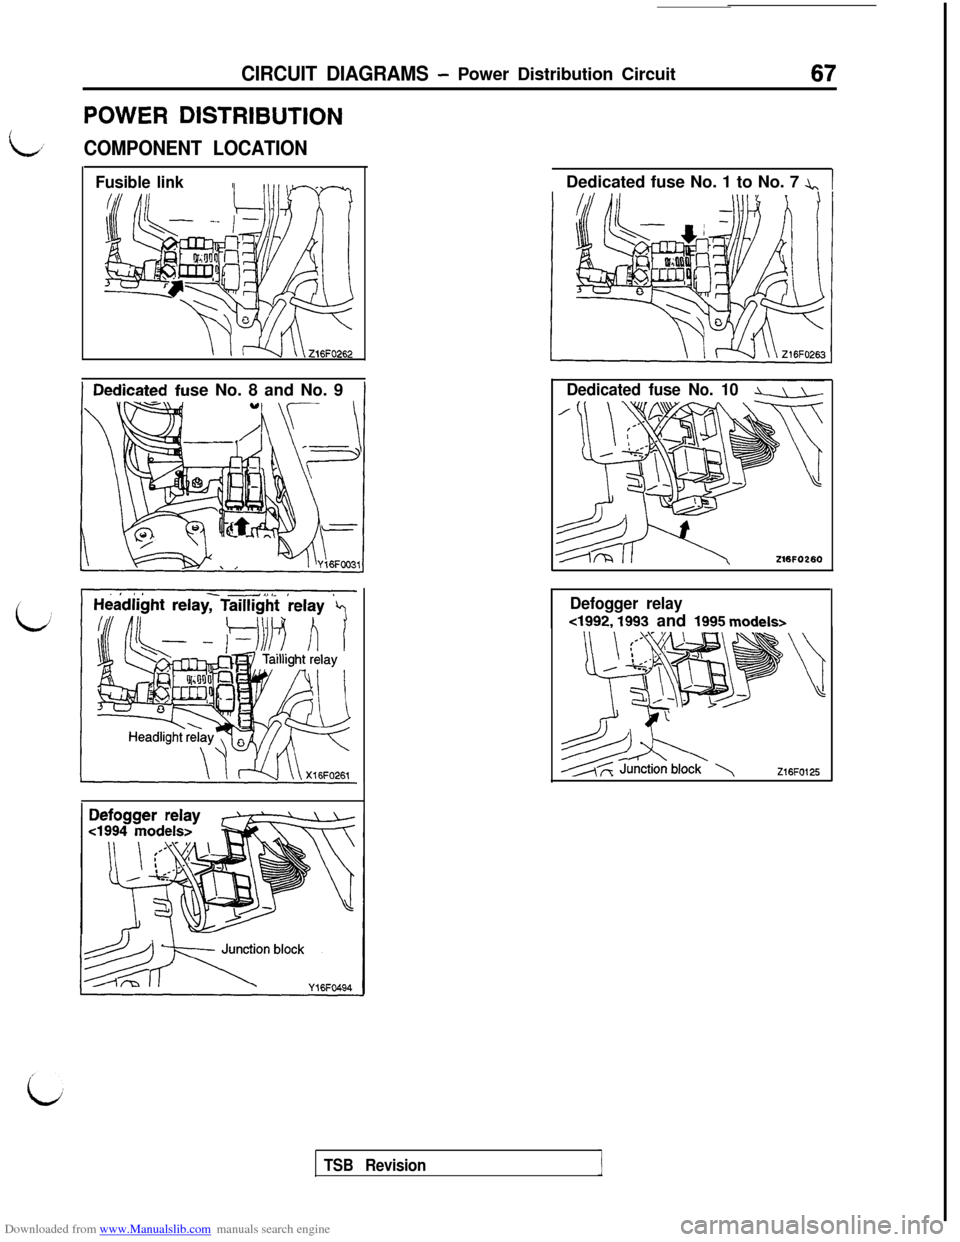 MITSUBISHI 3000GT 1994 2.G Workshop Manual Downloaded from www.Manualslib.com manuals search engine CIRCUIT DIAGRAMS - Power Distribution Circuit67
POWER DISTRIBUTION
L,’COMPONENT LOCATION
Fusible linkse No. 8 and No. 9Dedicated fuse No. 1 t